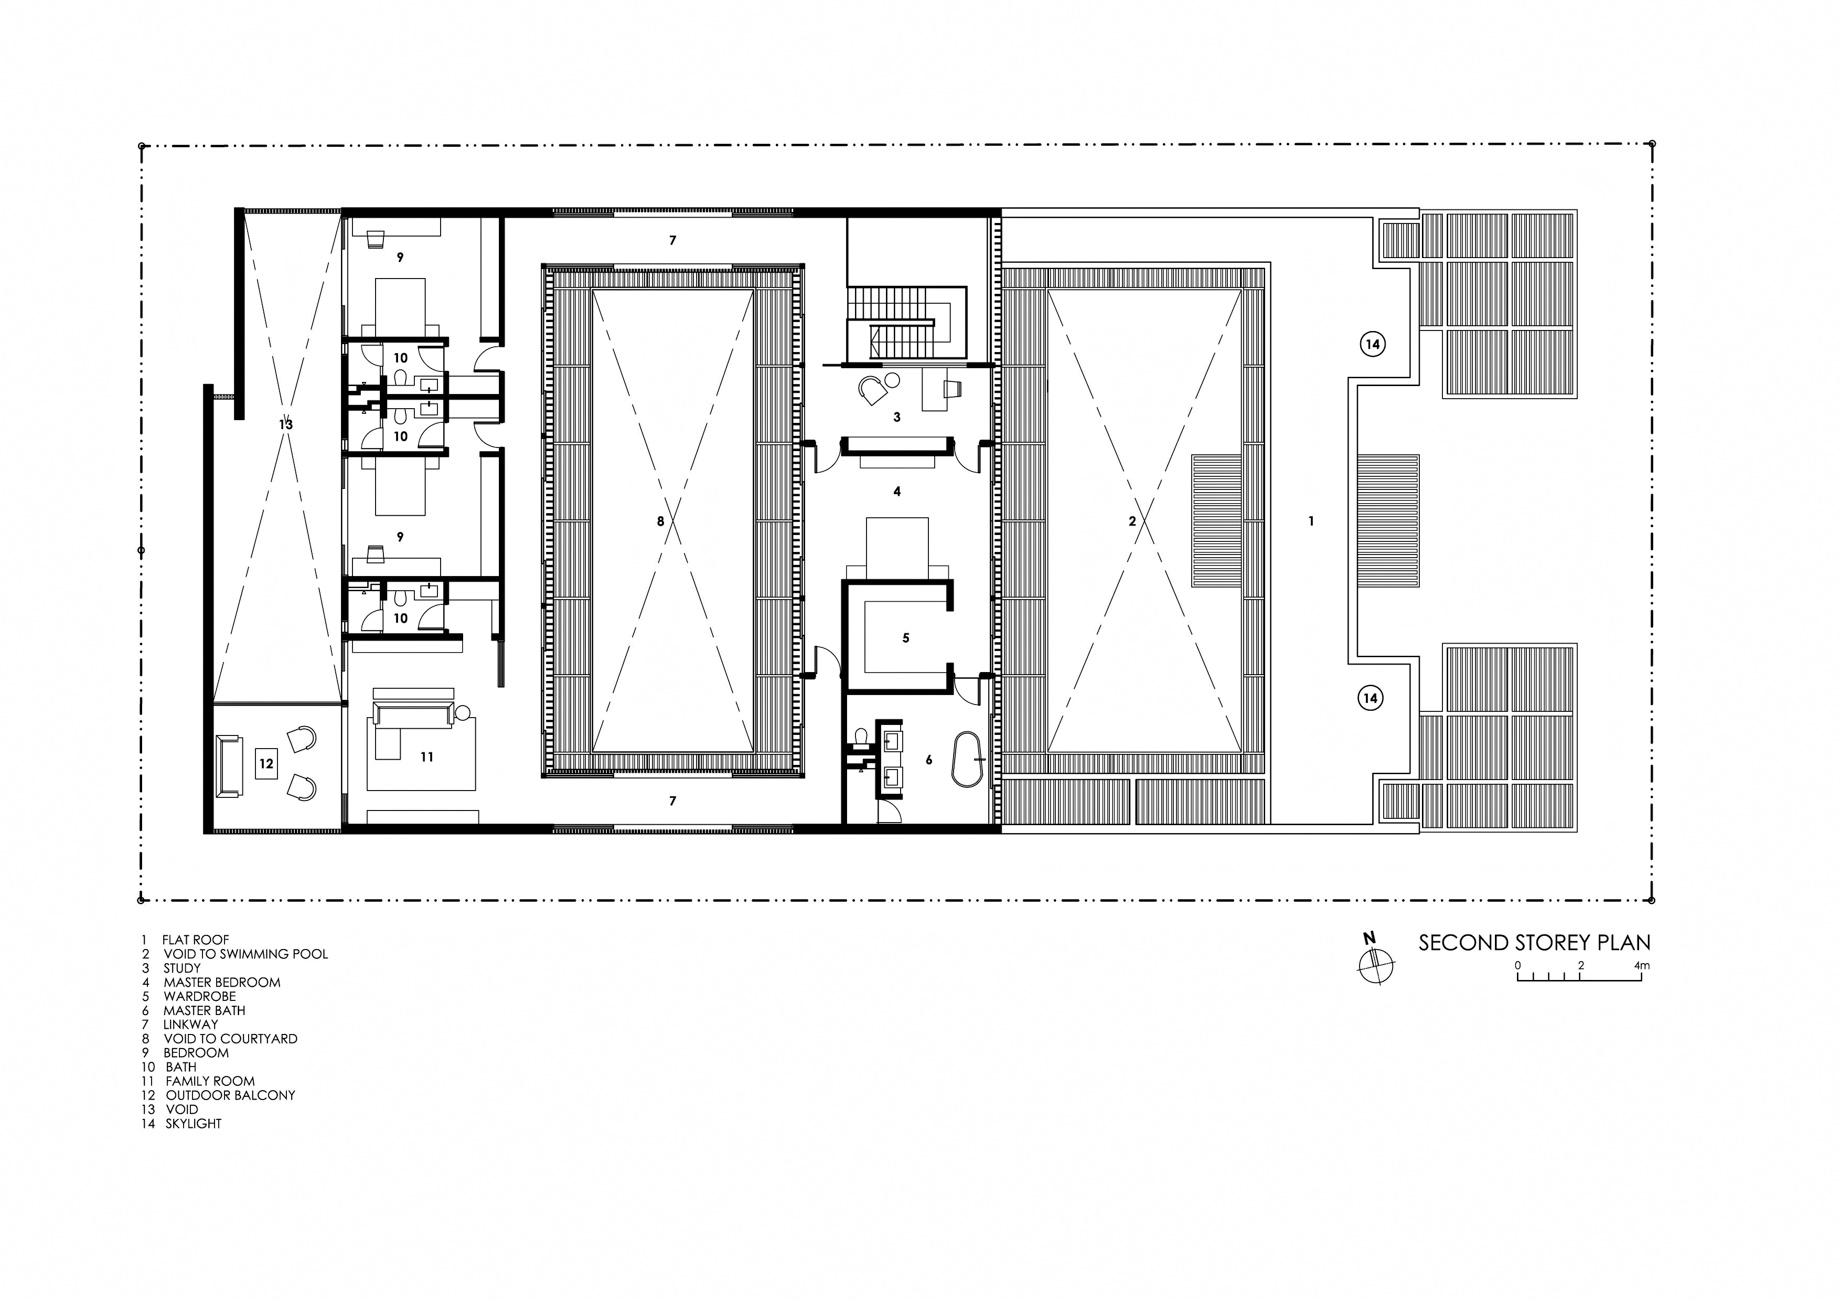 Second Floor Plan - Enclosed Open House Luxury Residence - Ramsgate Rd, Singapore